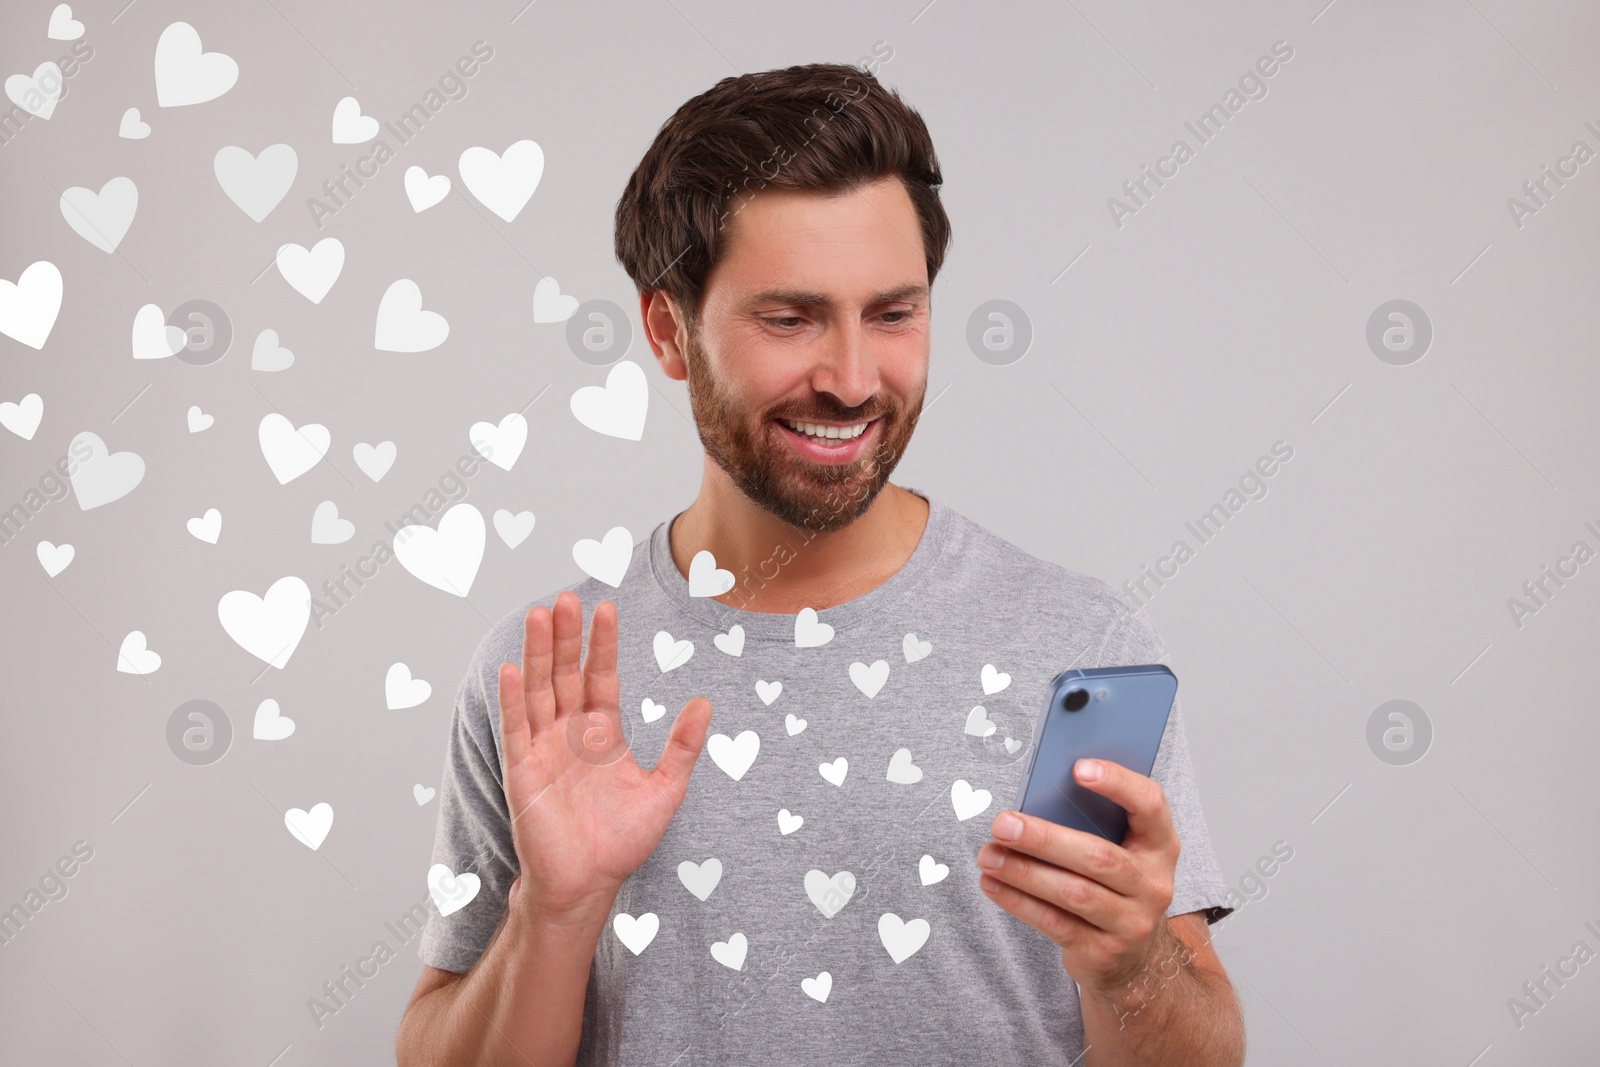 Image of Long distance love. Man video chatting with sweetheart via smartphone on grey background. Hearts flying out of device